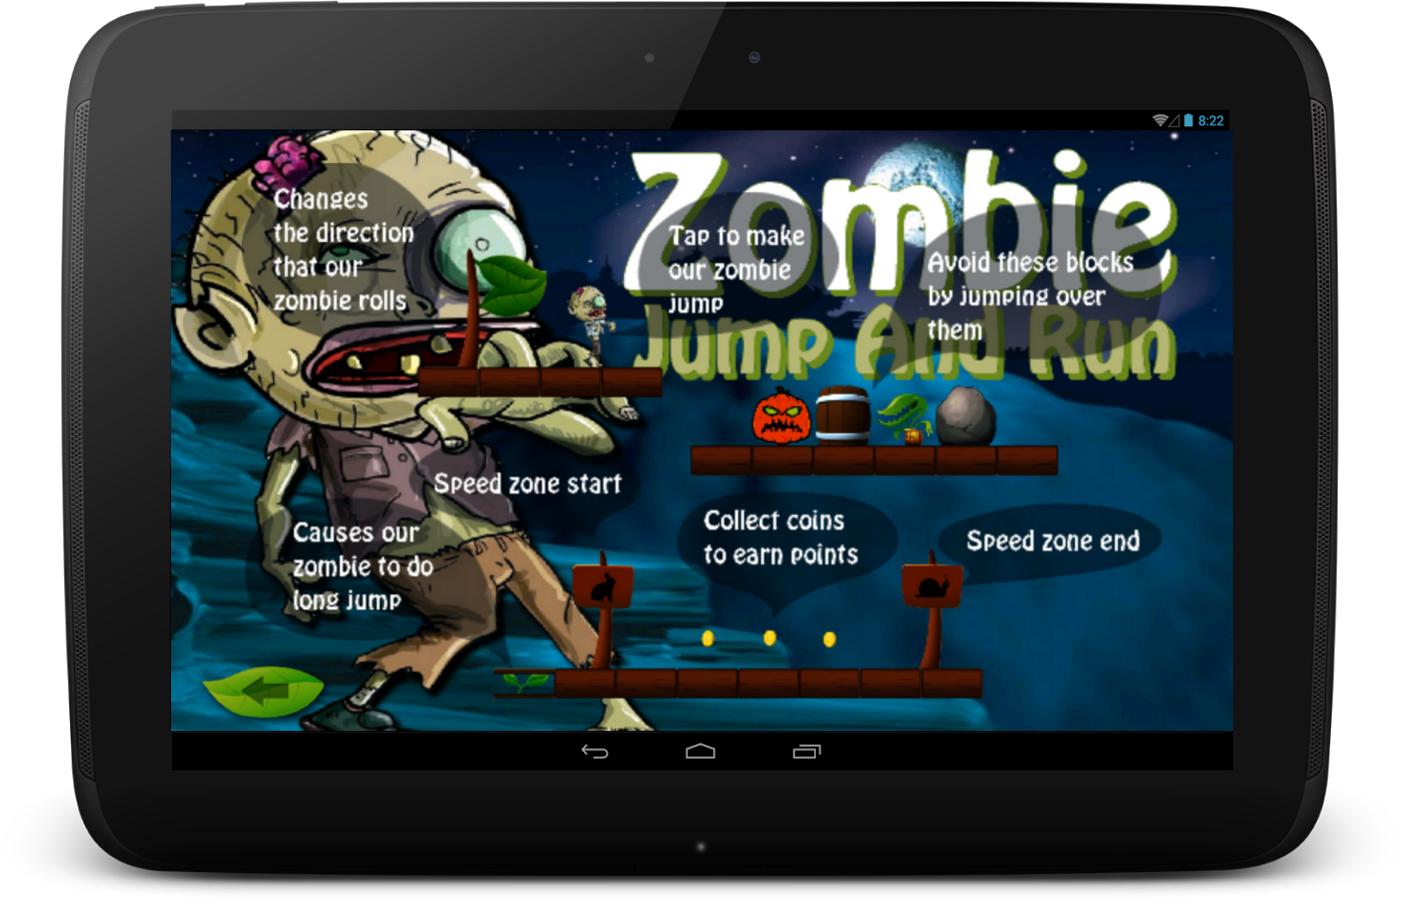 Zombie – Jump And Run